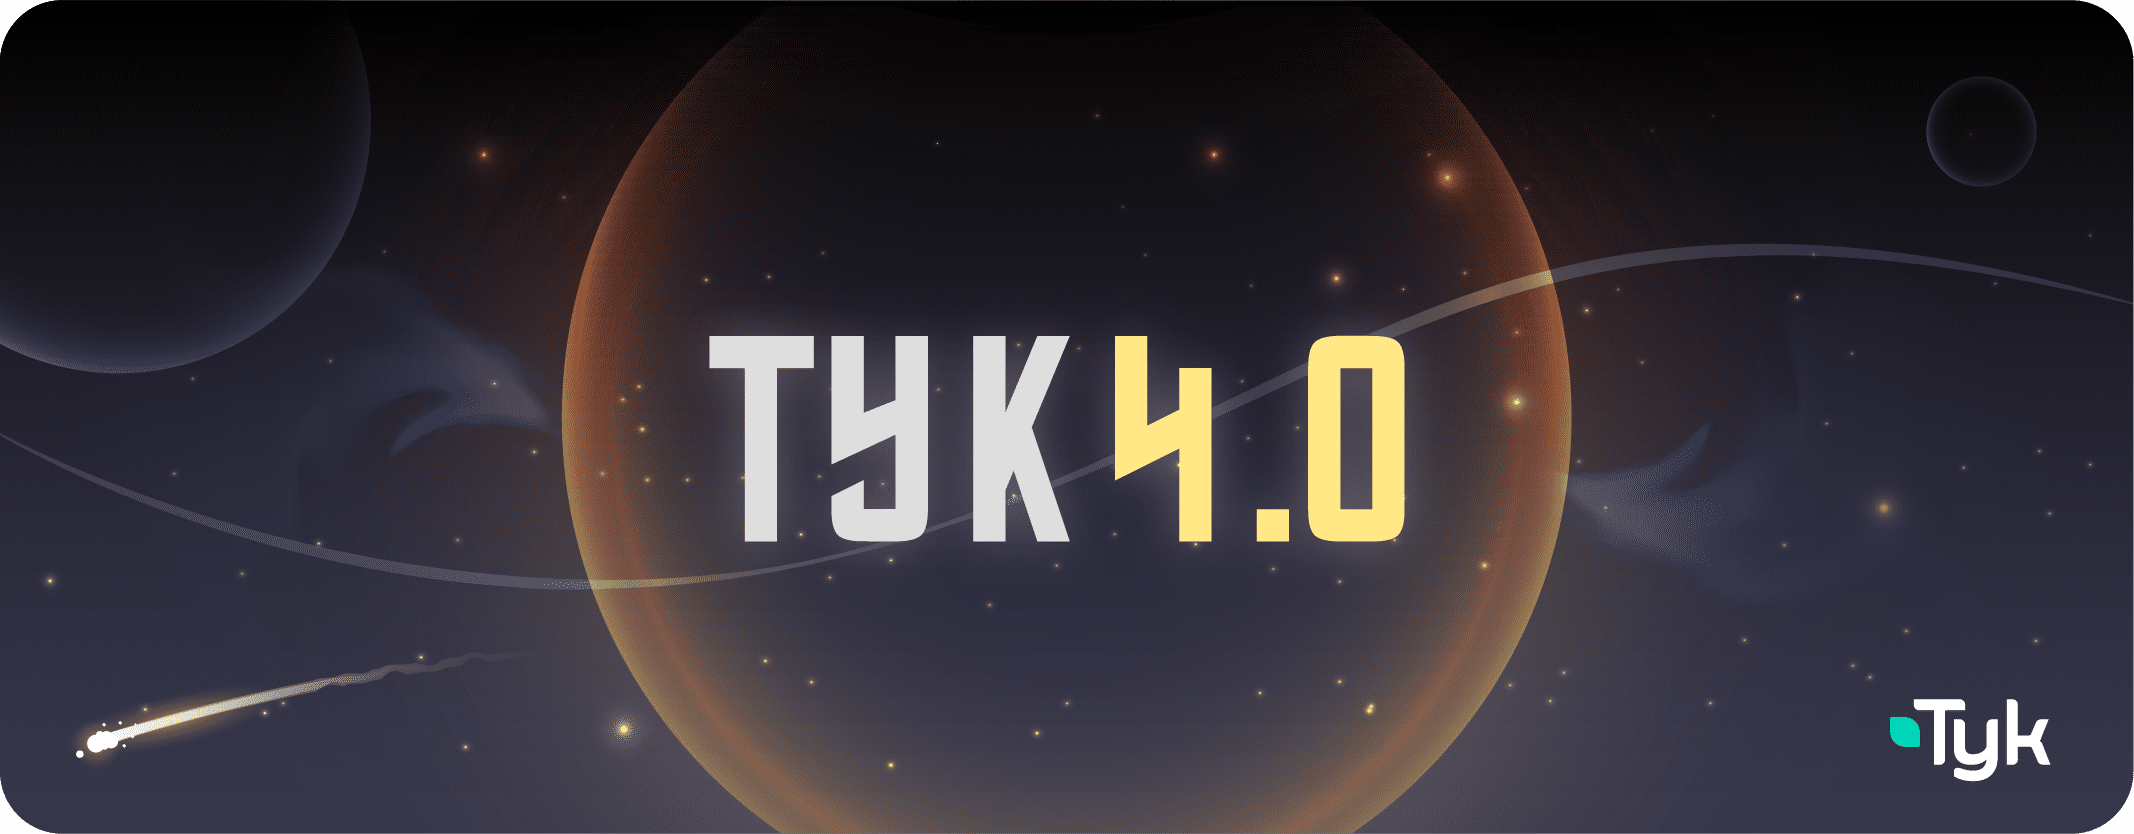 Tyk 4.0 space themed illustration